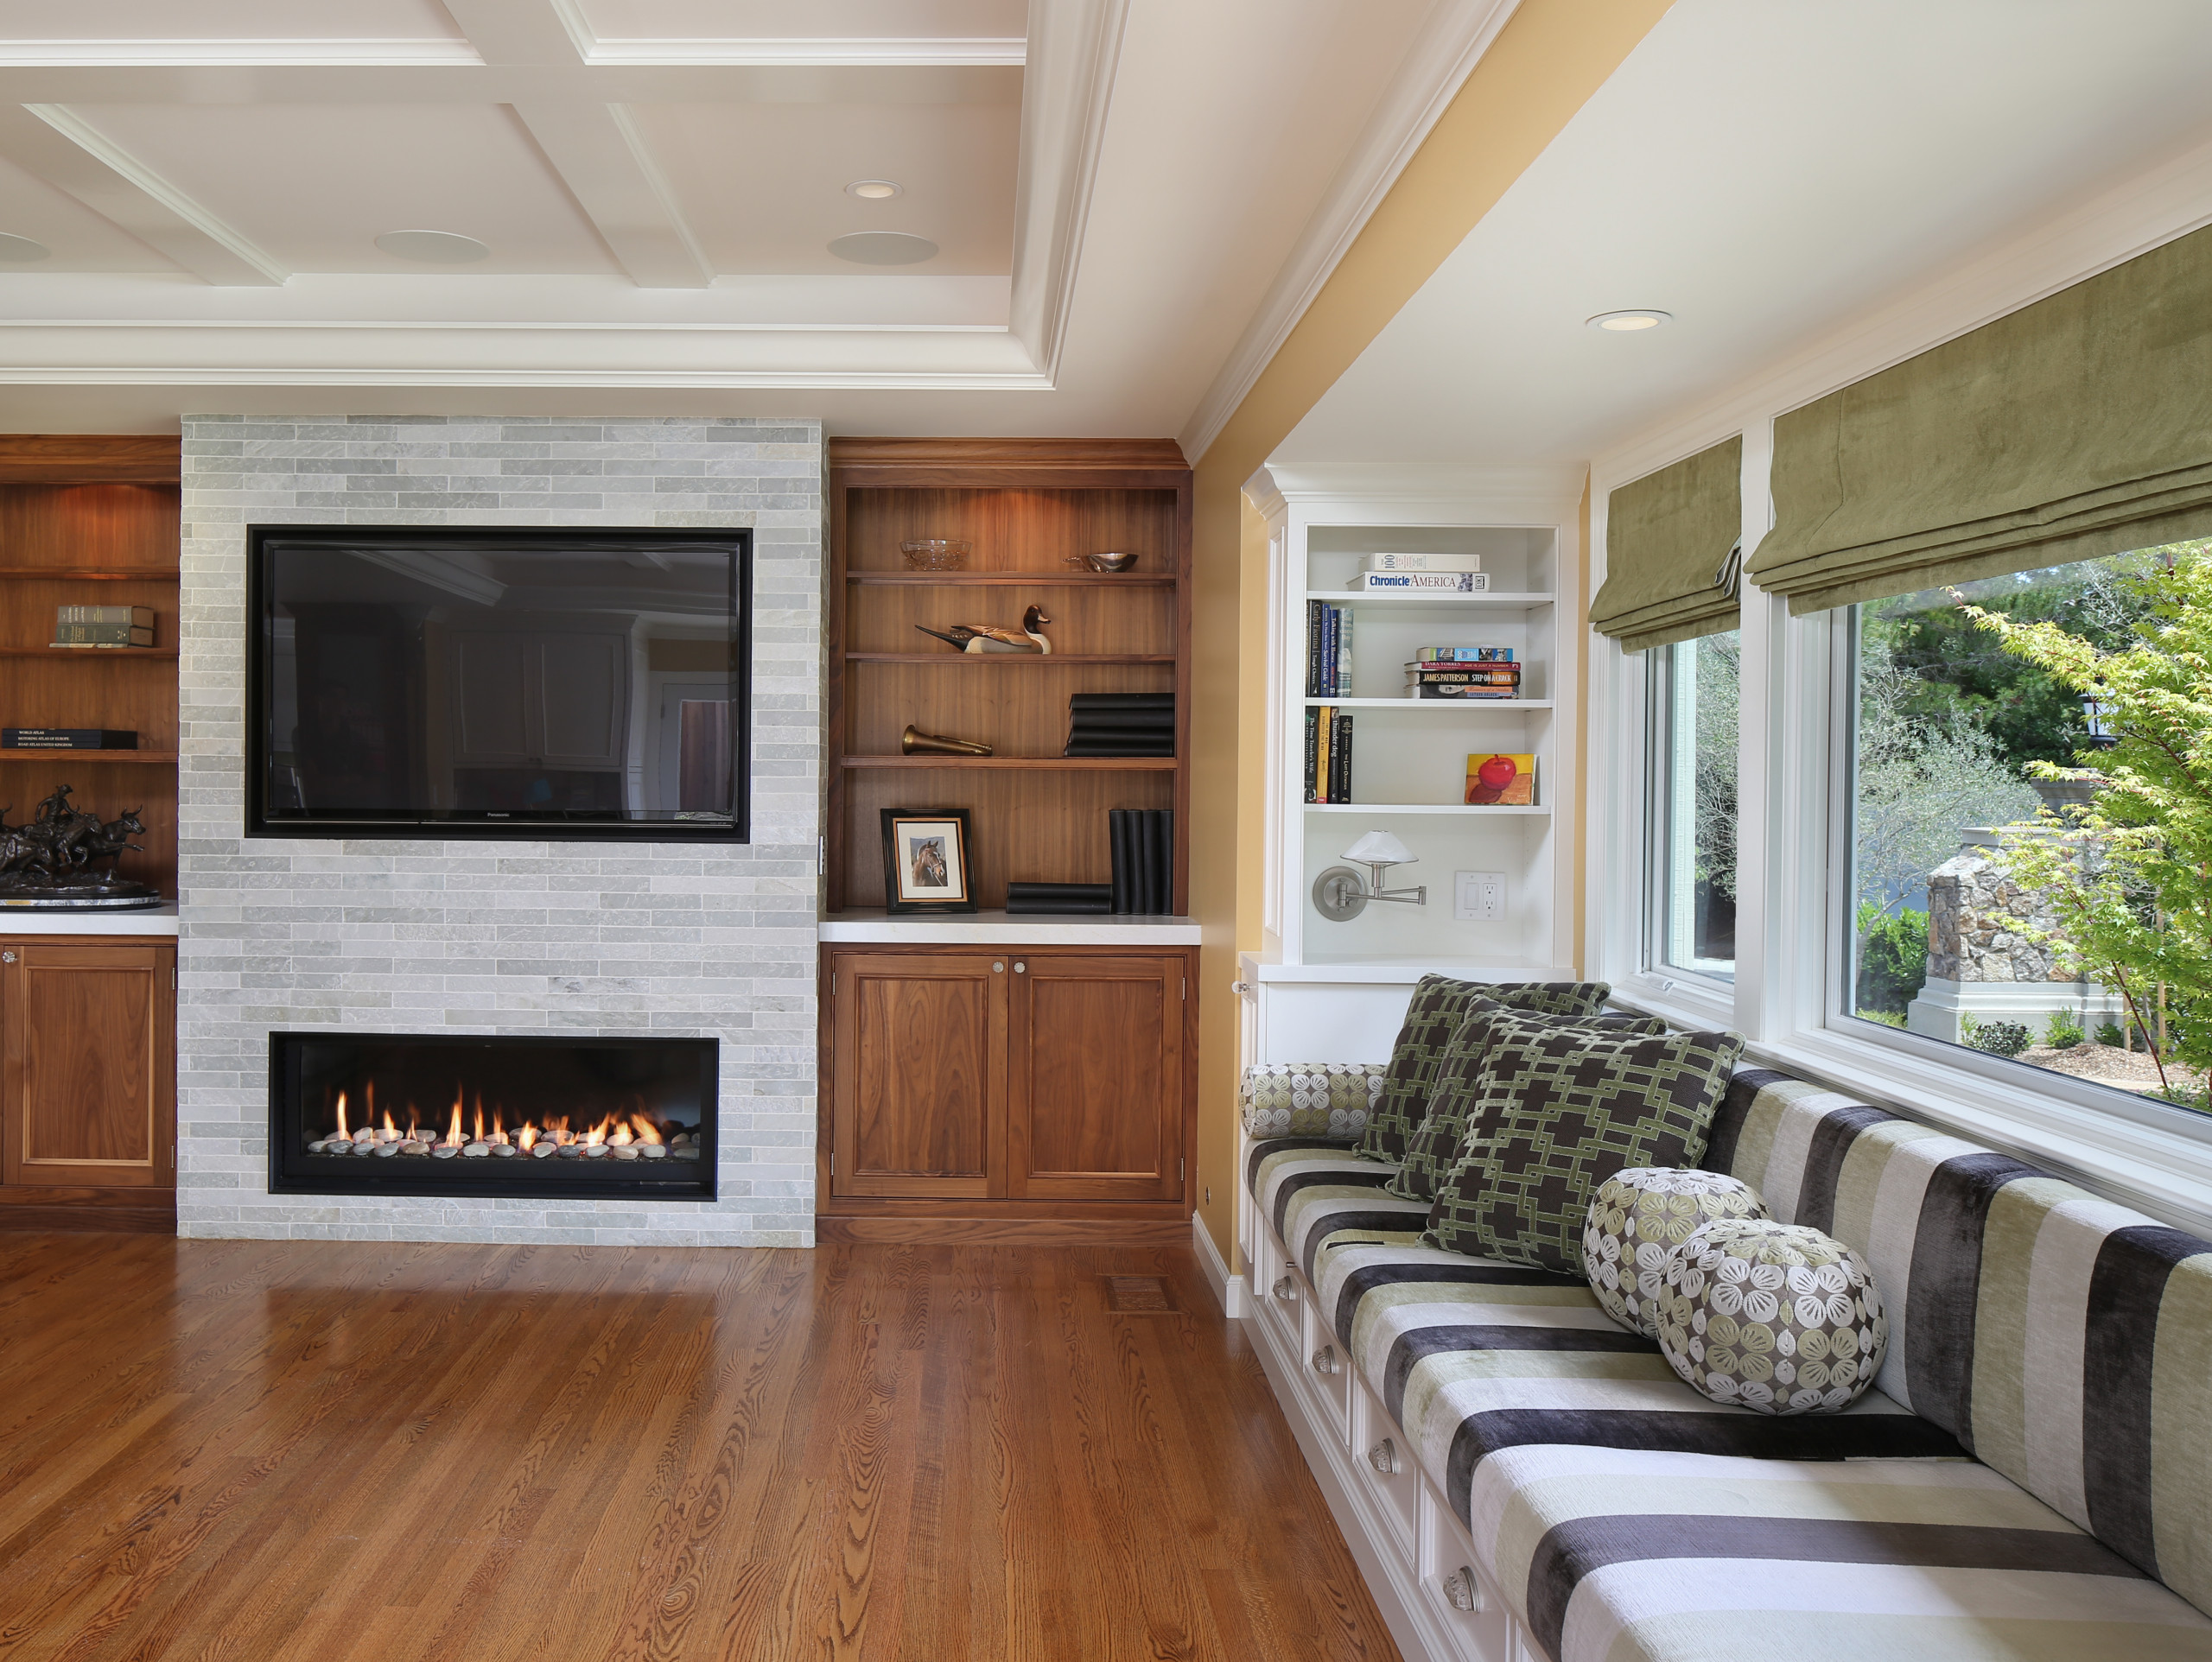 Transitional family room